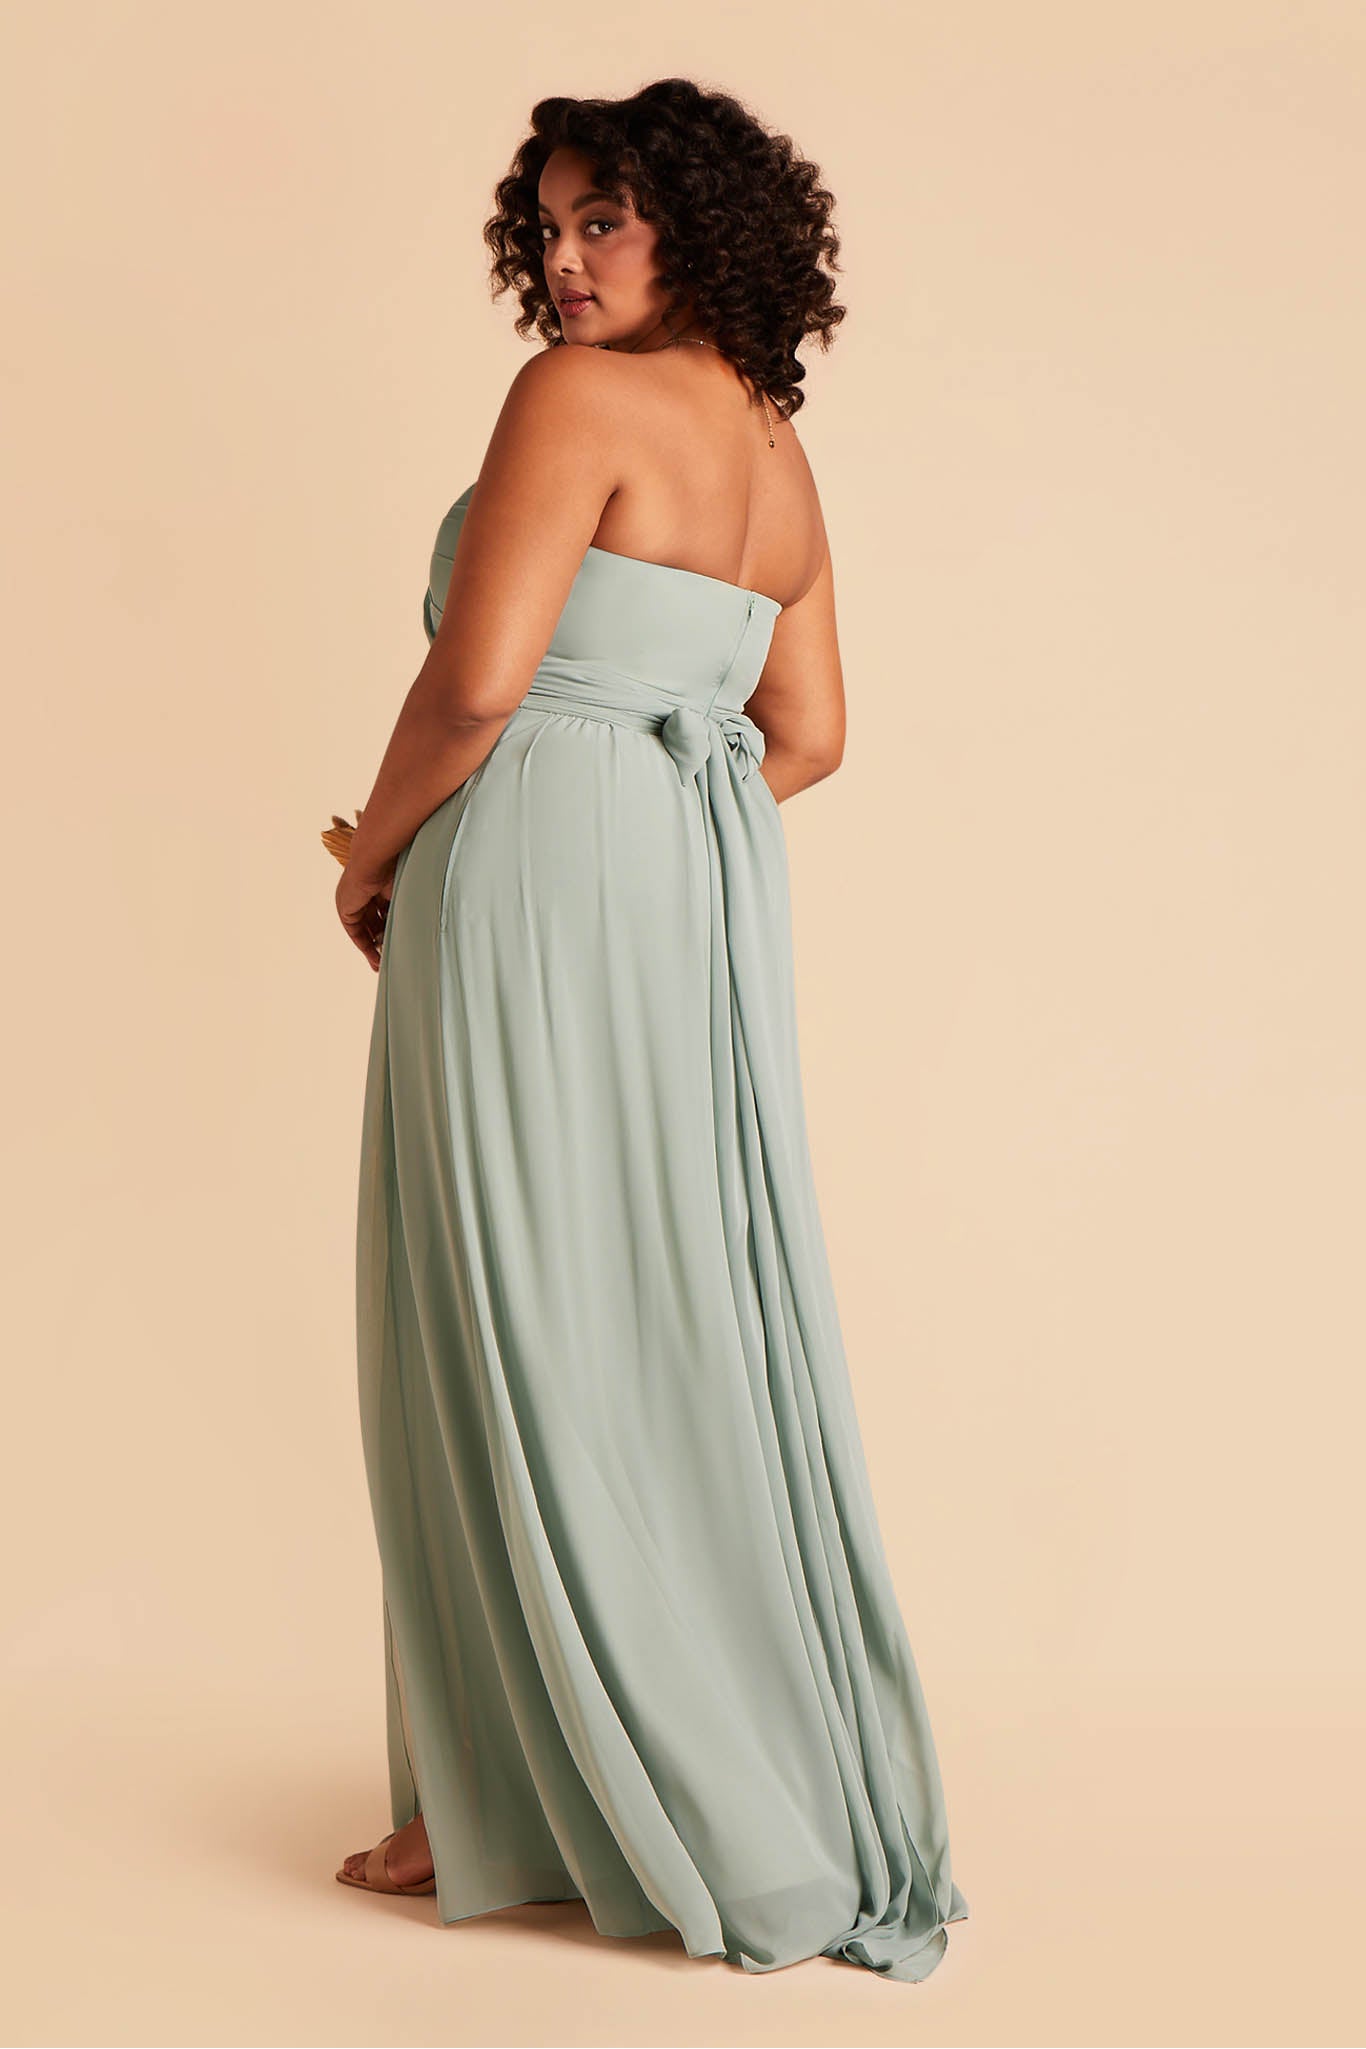 Side view of the Grace Convertible Plus Size Bridesmaid Dress in sea glass chiffon reveals a fitted bust with a floor-length skirt flowing from the waist.